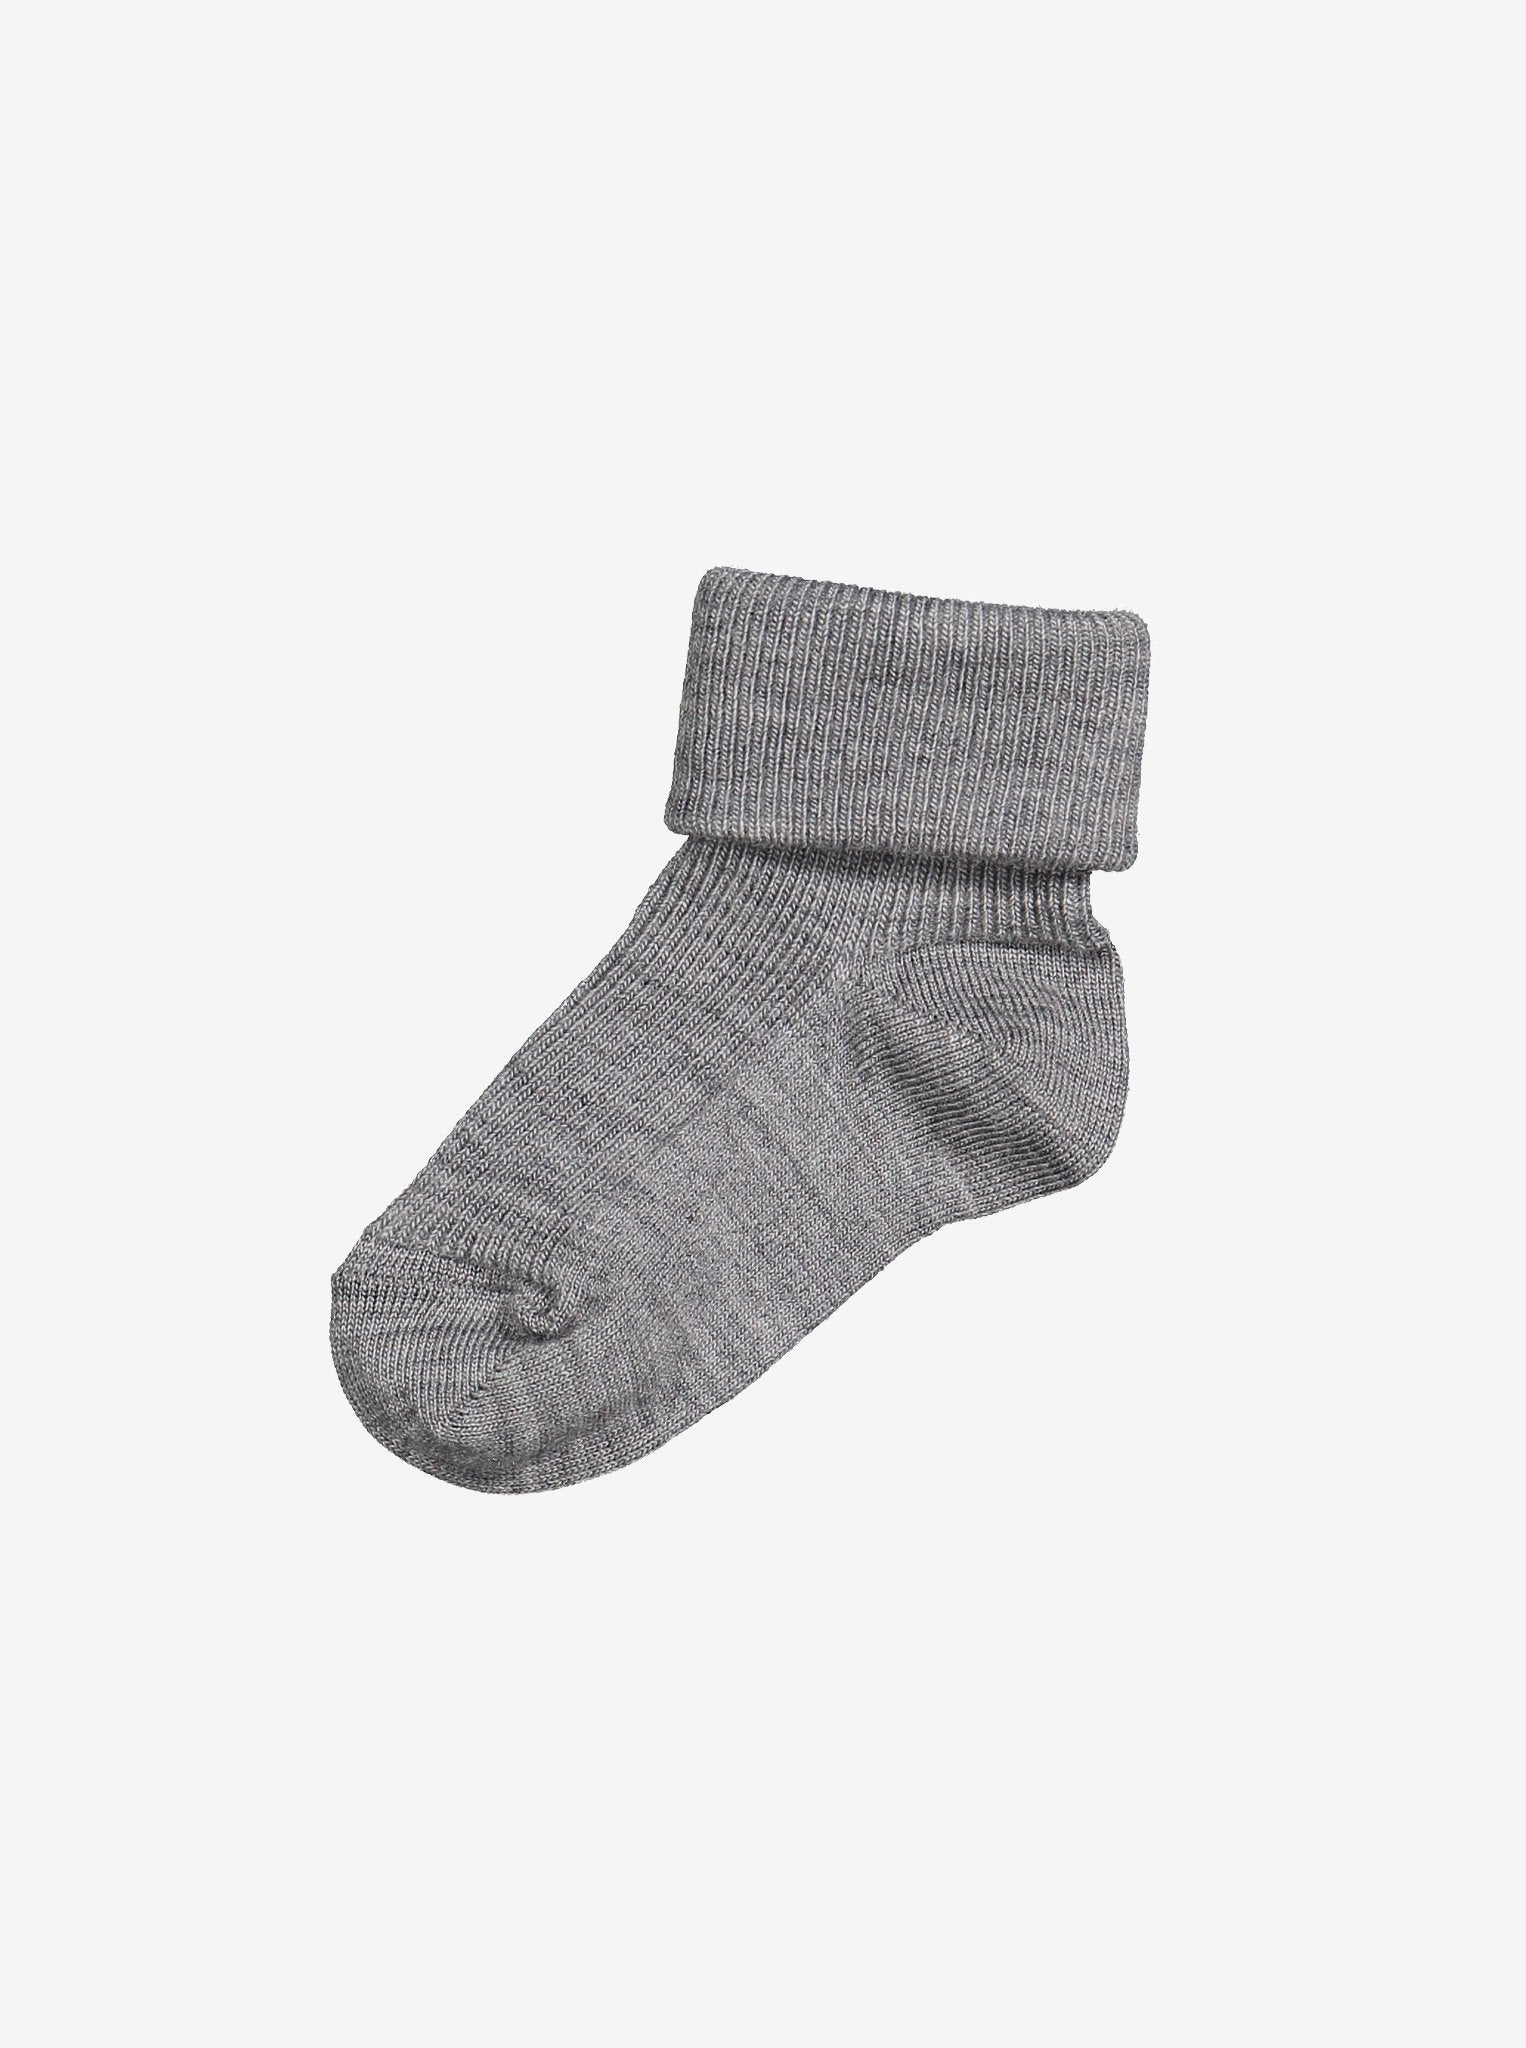 baby grey merino antislip kids socks unisex, warm comfortable and none itchy, ethical and long lasting